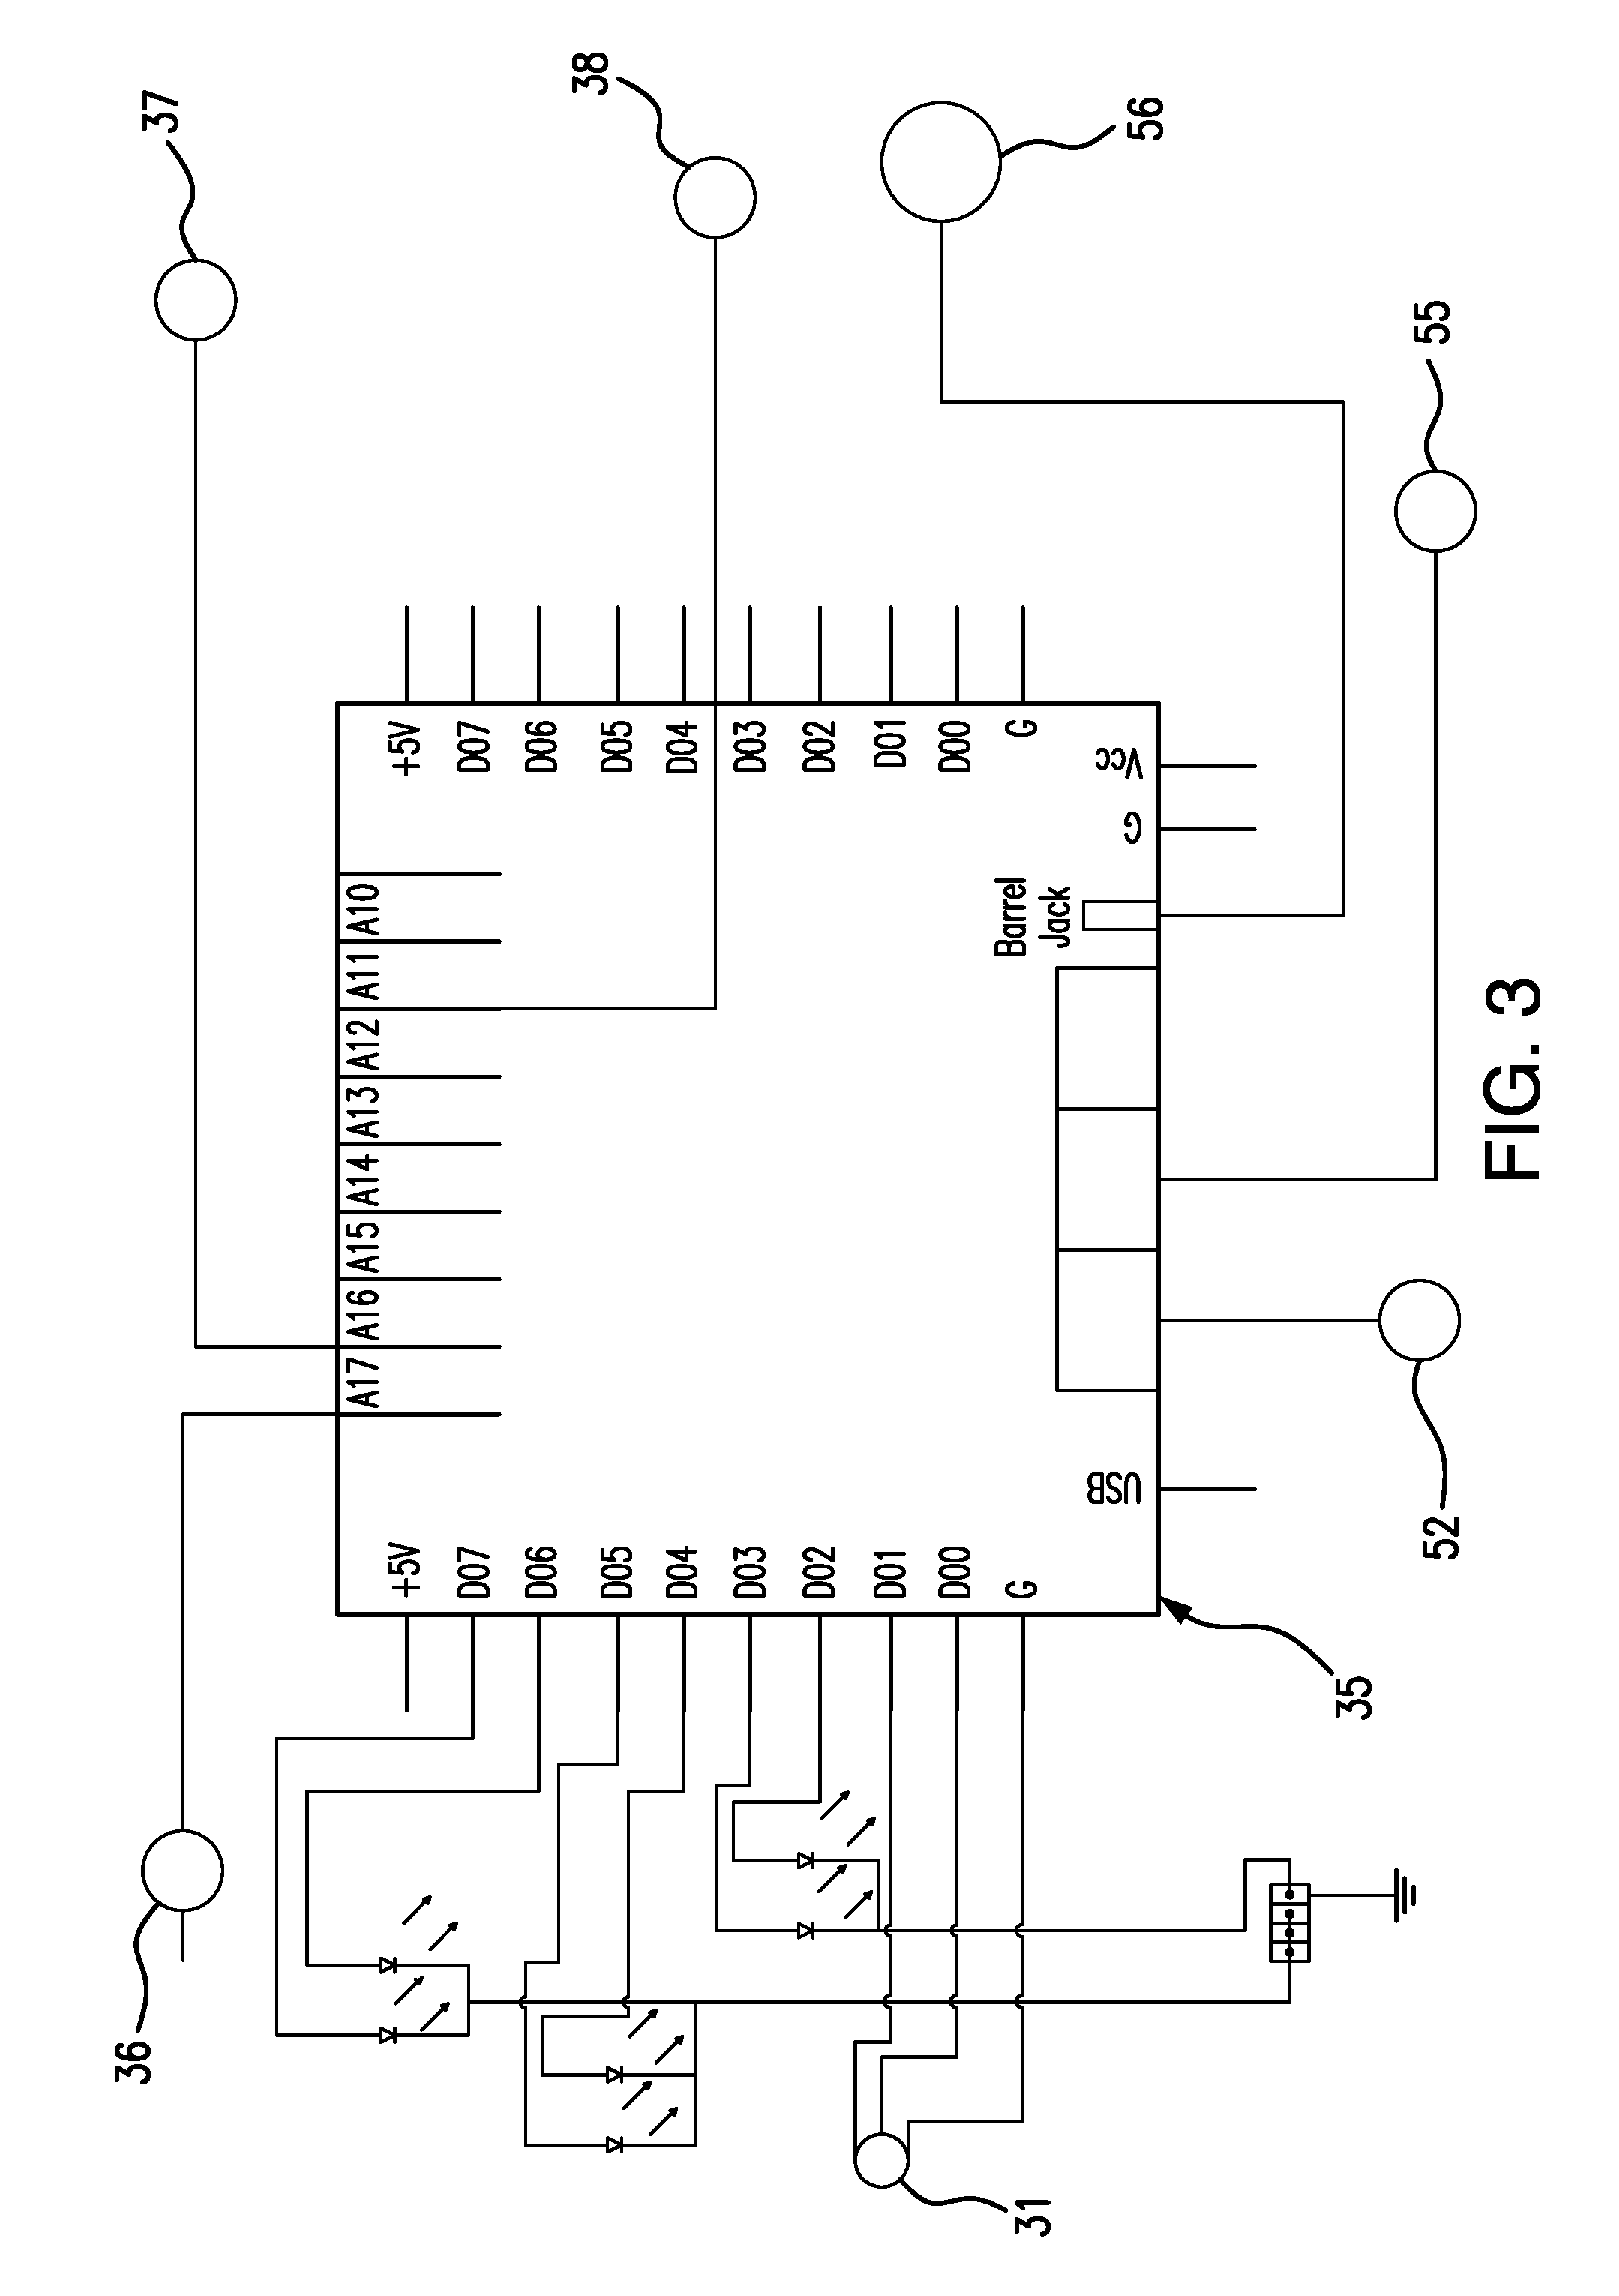 Liability intervention logistical innovation system and method